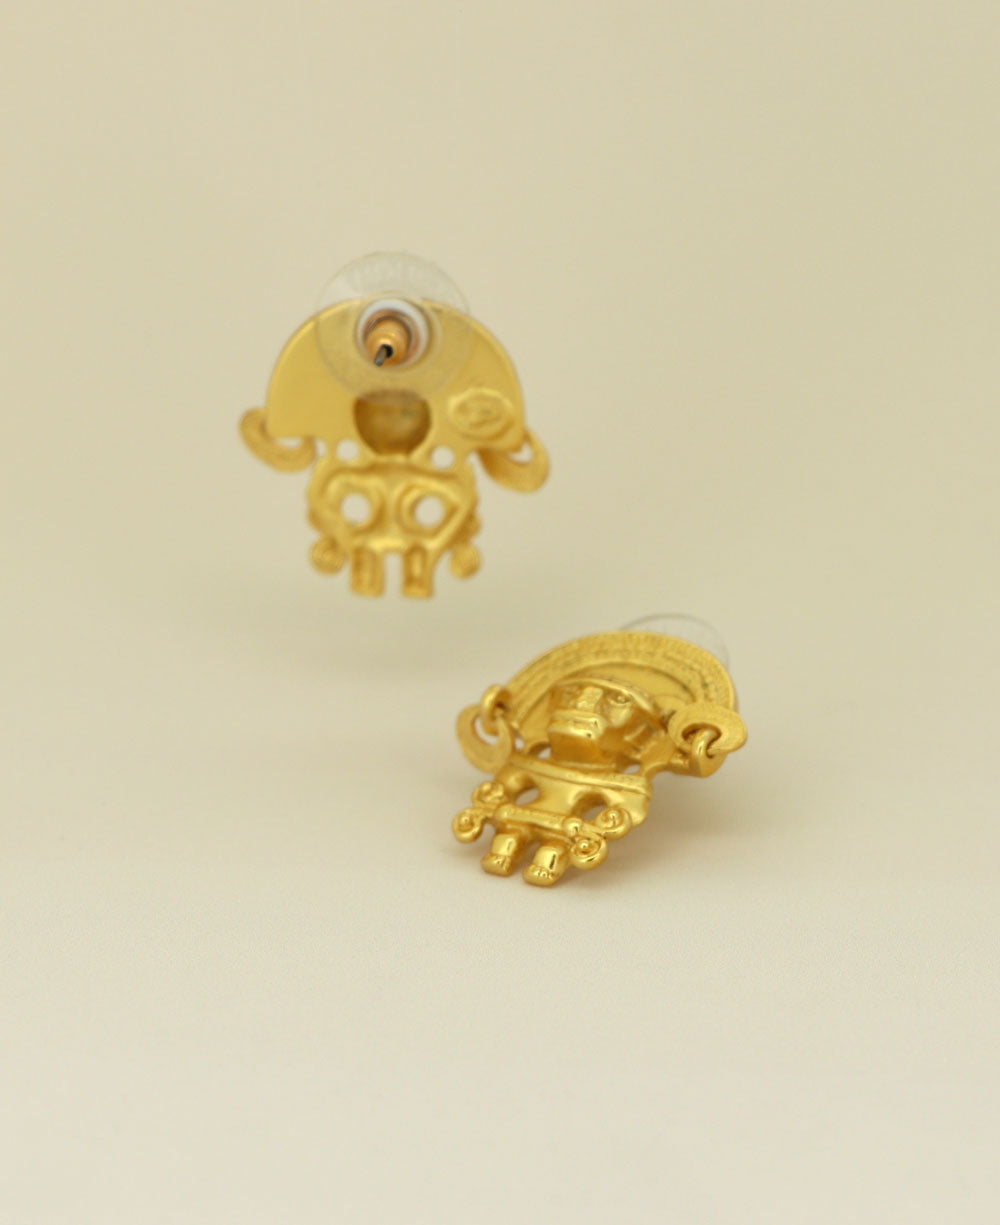 Image of the Gold Plated Tairona Symbol Earrings, showcasing the post backing 